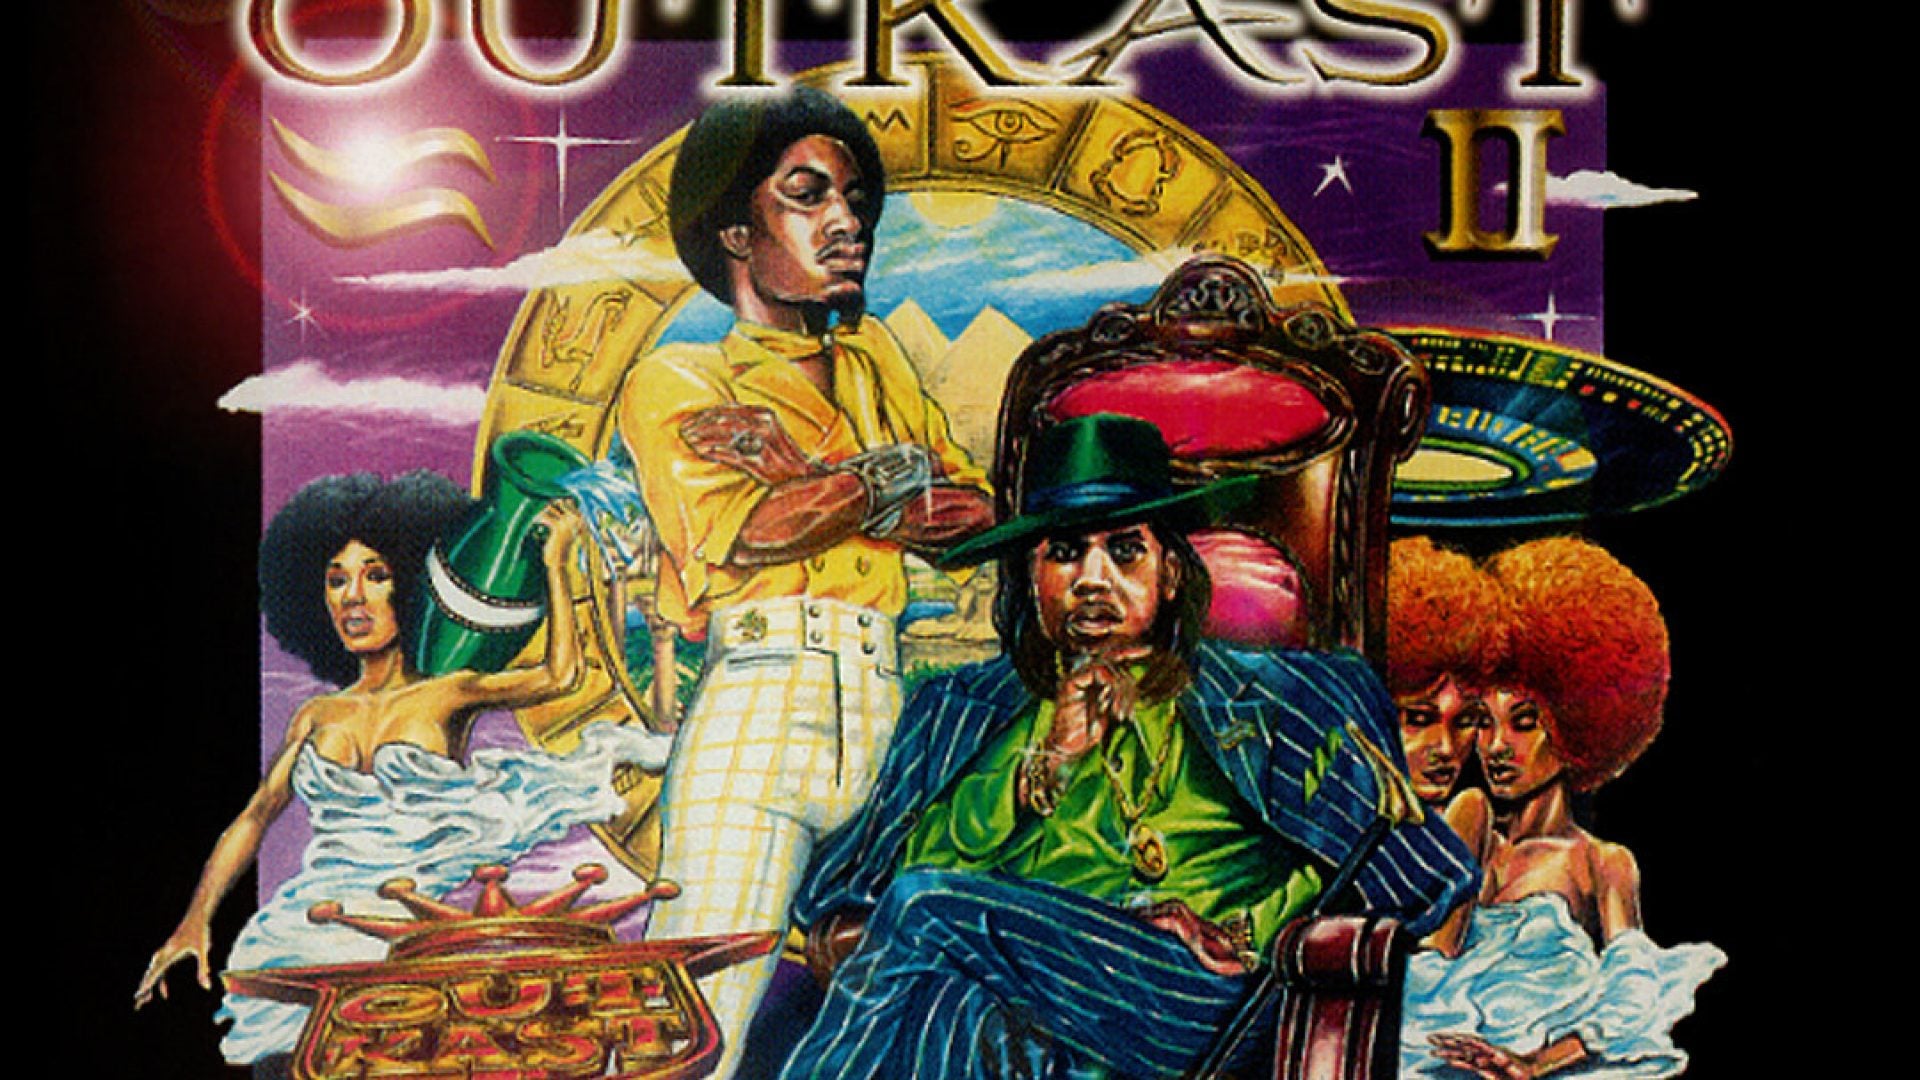 ‘Aquemini’ At 25: How OutKast’s Duality Made For A Timeless Classic